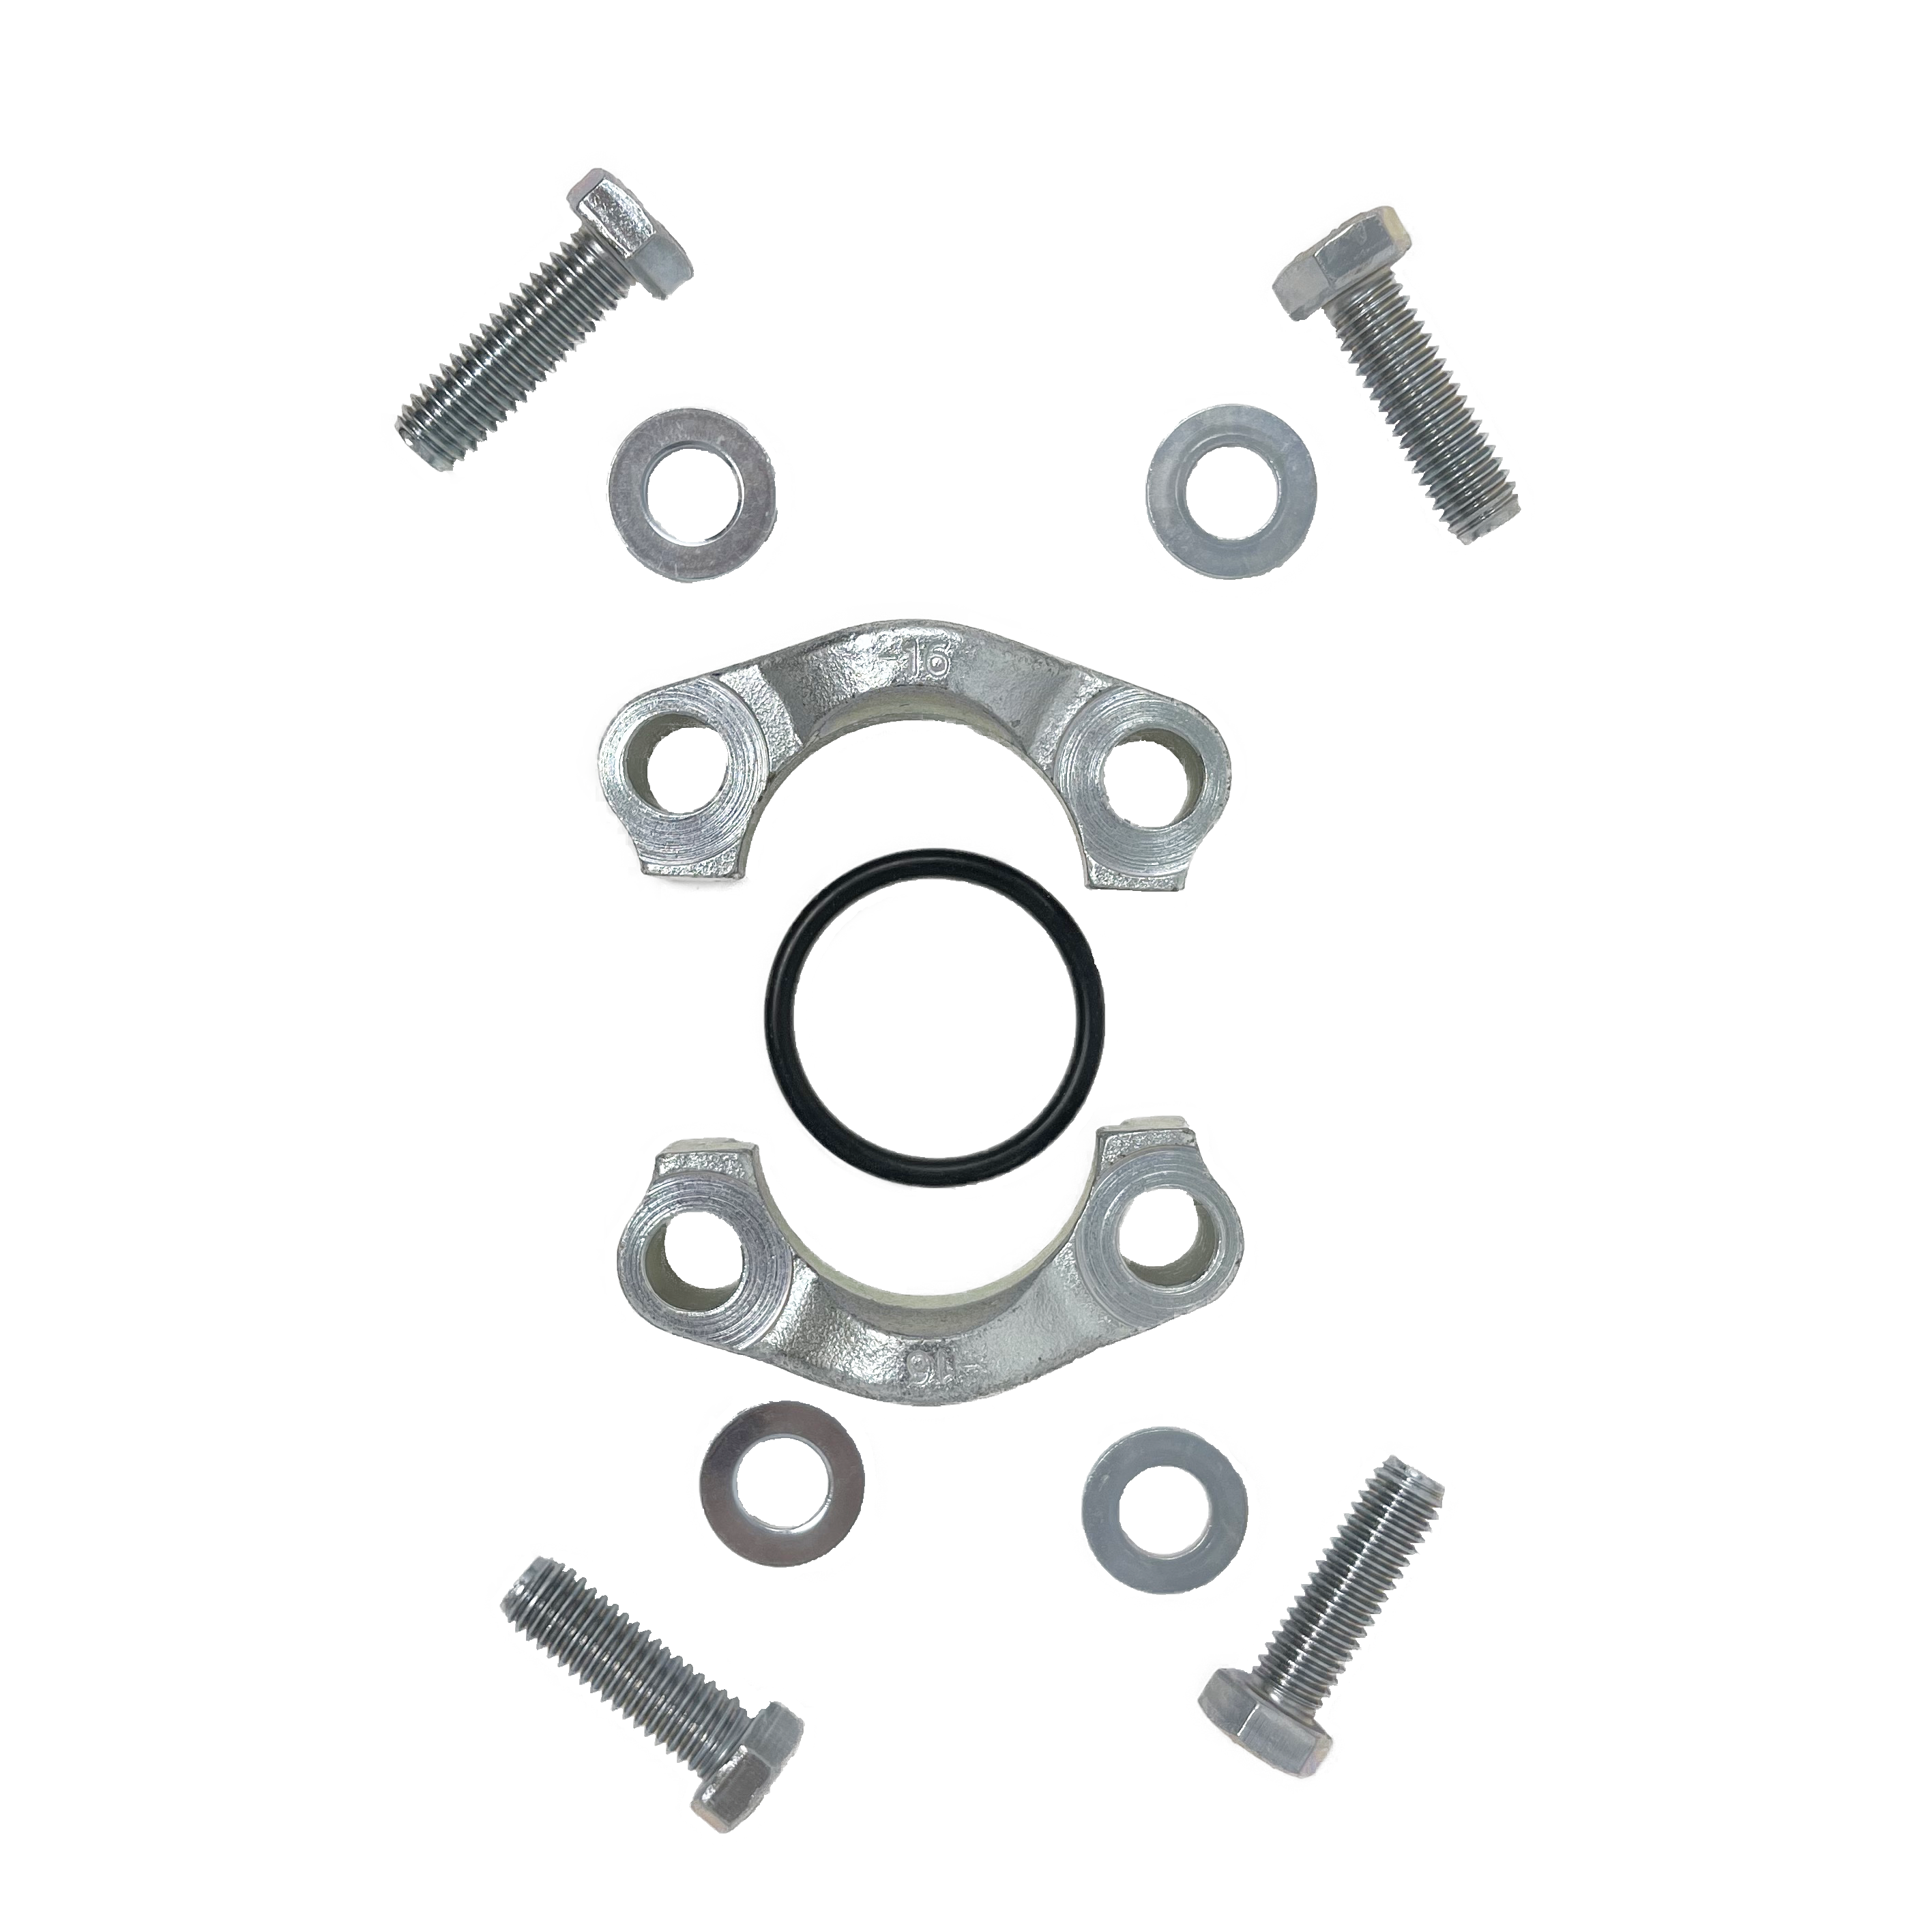 12SFO : AFP Split Flange Kit, Steel, 0.75 (3/4") Code 61, 3000psi, Includes two (2) halves, four (4) bolts, four (4) washers, and one (1) O-Ring